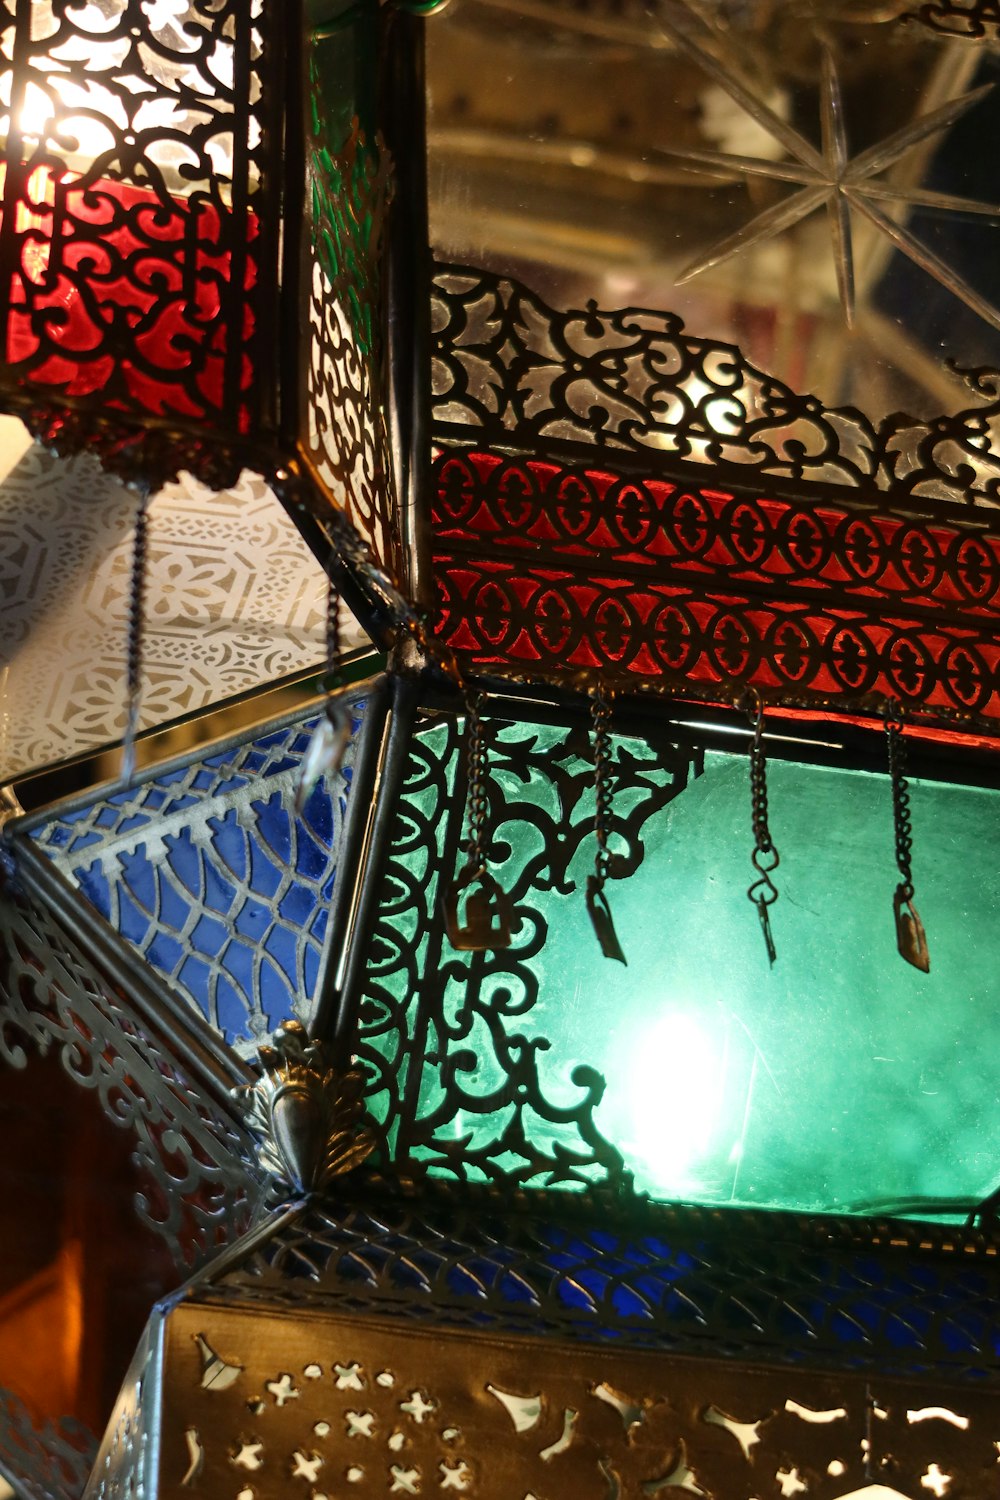 a close up of a light fixture with many different colors